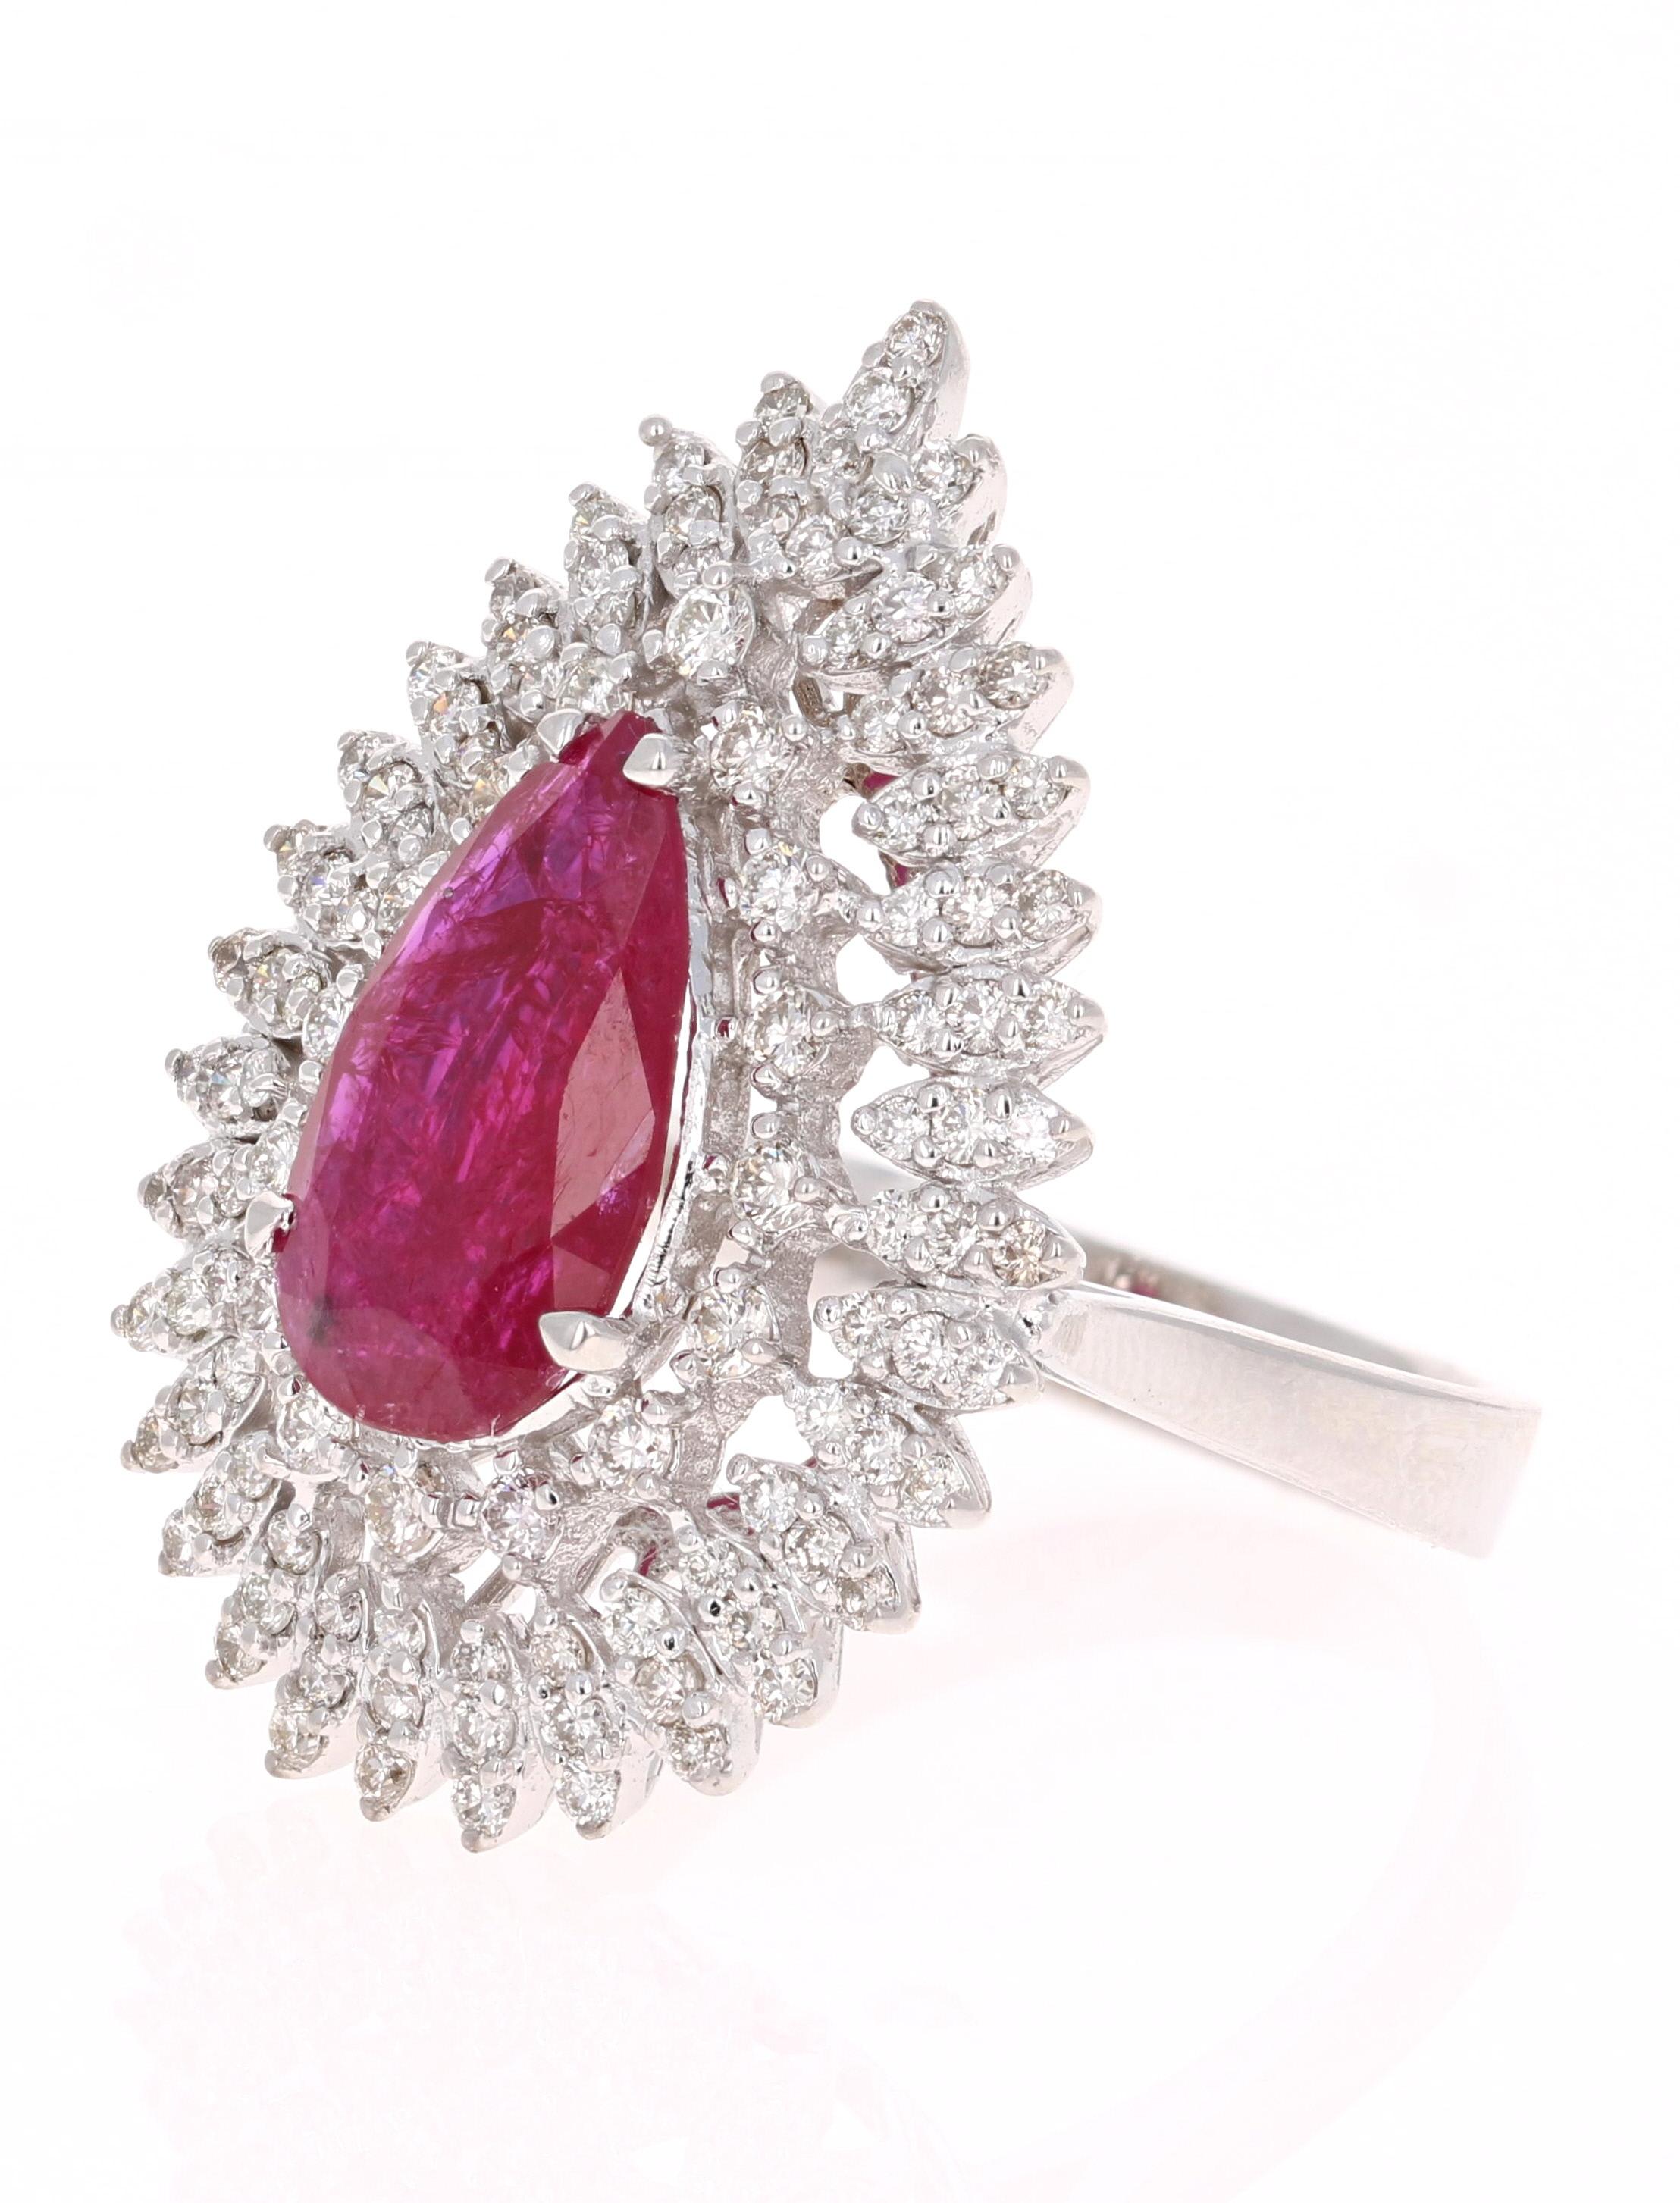 Modern GIA Certified 4.89 Carat Unheated Ruby Diamond Cocktail Ring